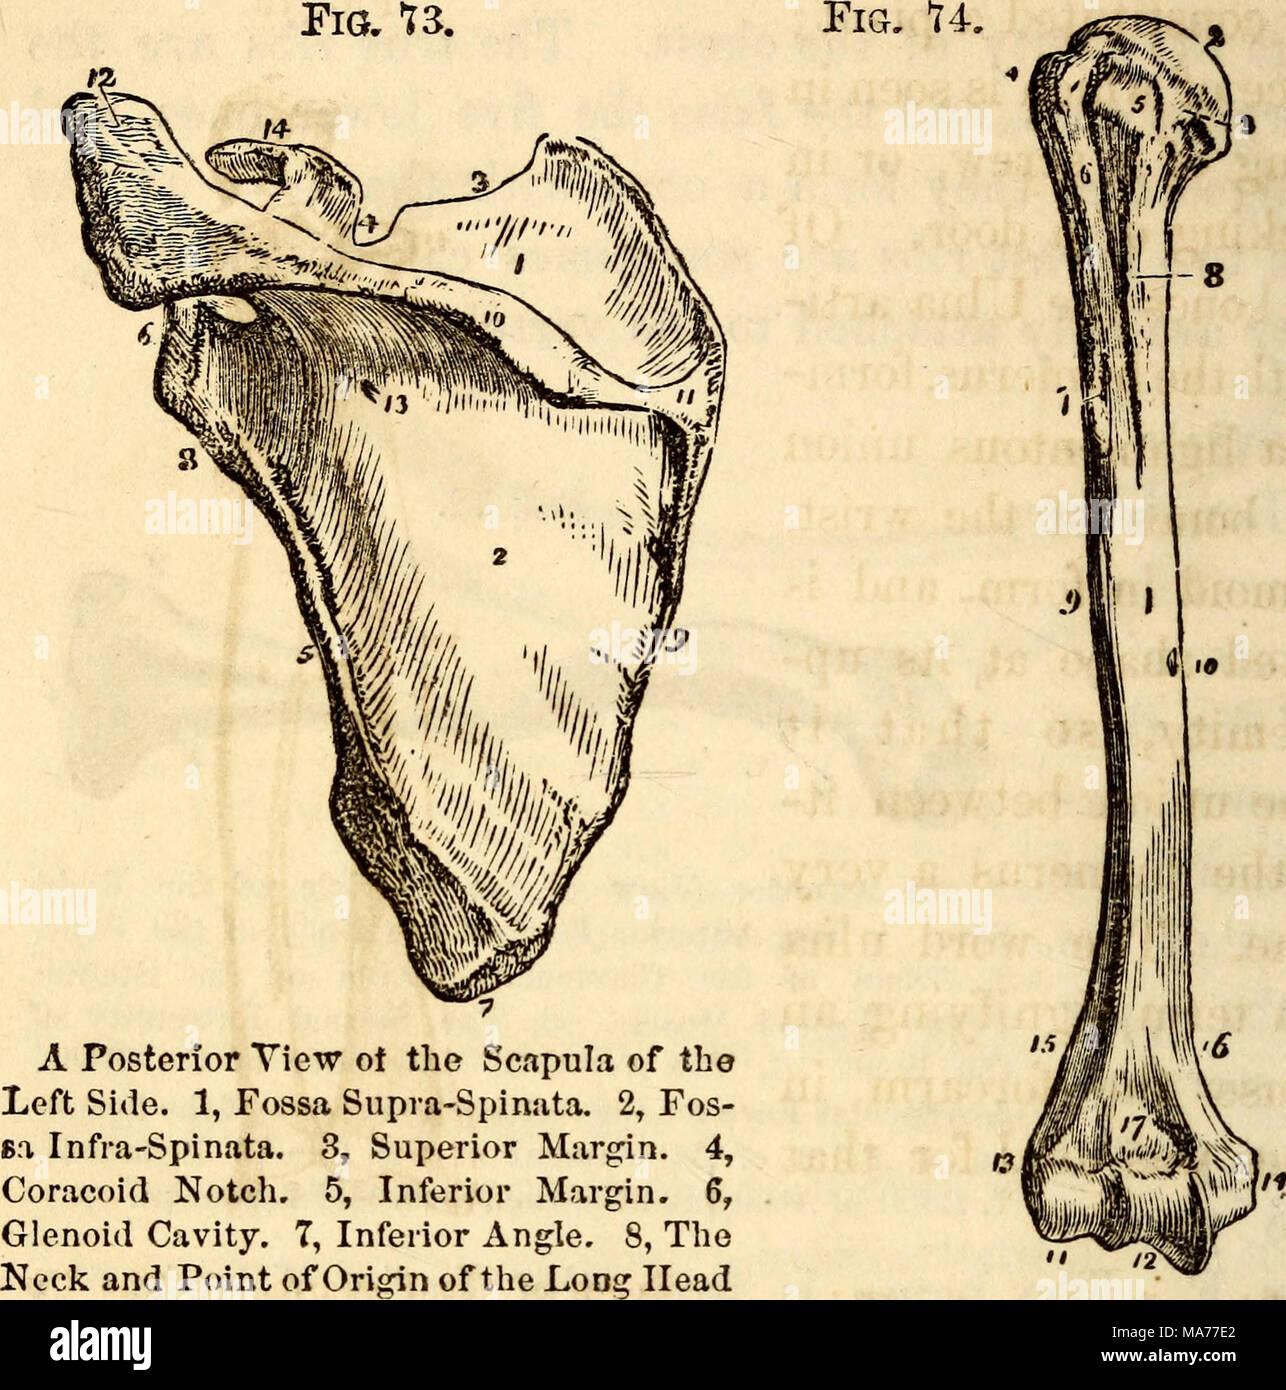 . Elementary anatomy and physiology : for colleges, academies, and other schools . of the Triceps Muscle. 9, Posterior, or An Anterior View of the Humerus of th« Vertebral Margin. 10, The Spine. 11, Eight Side. 1, The Shaft, or Diaphysis of Smooth Facet for the Trapezius Muscle. the Bone. 2, The Head. 3, Anatomical 12, Acromion Process. 13, Nutritious Fo- Neck. 4, Greater Tuberosity. 5, Lesser raraen. 14, Coracoid Process. 15, Part of Tuberosity. 6, The Bicipital Groove. 7, the Origin of the Deltoid Muscle. External Bicipital Eidge for the insertion of the Pectoralis Major. 8, Internal Bici- p Stock Photo